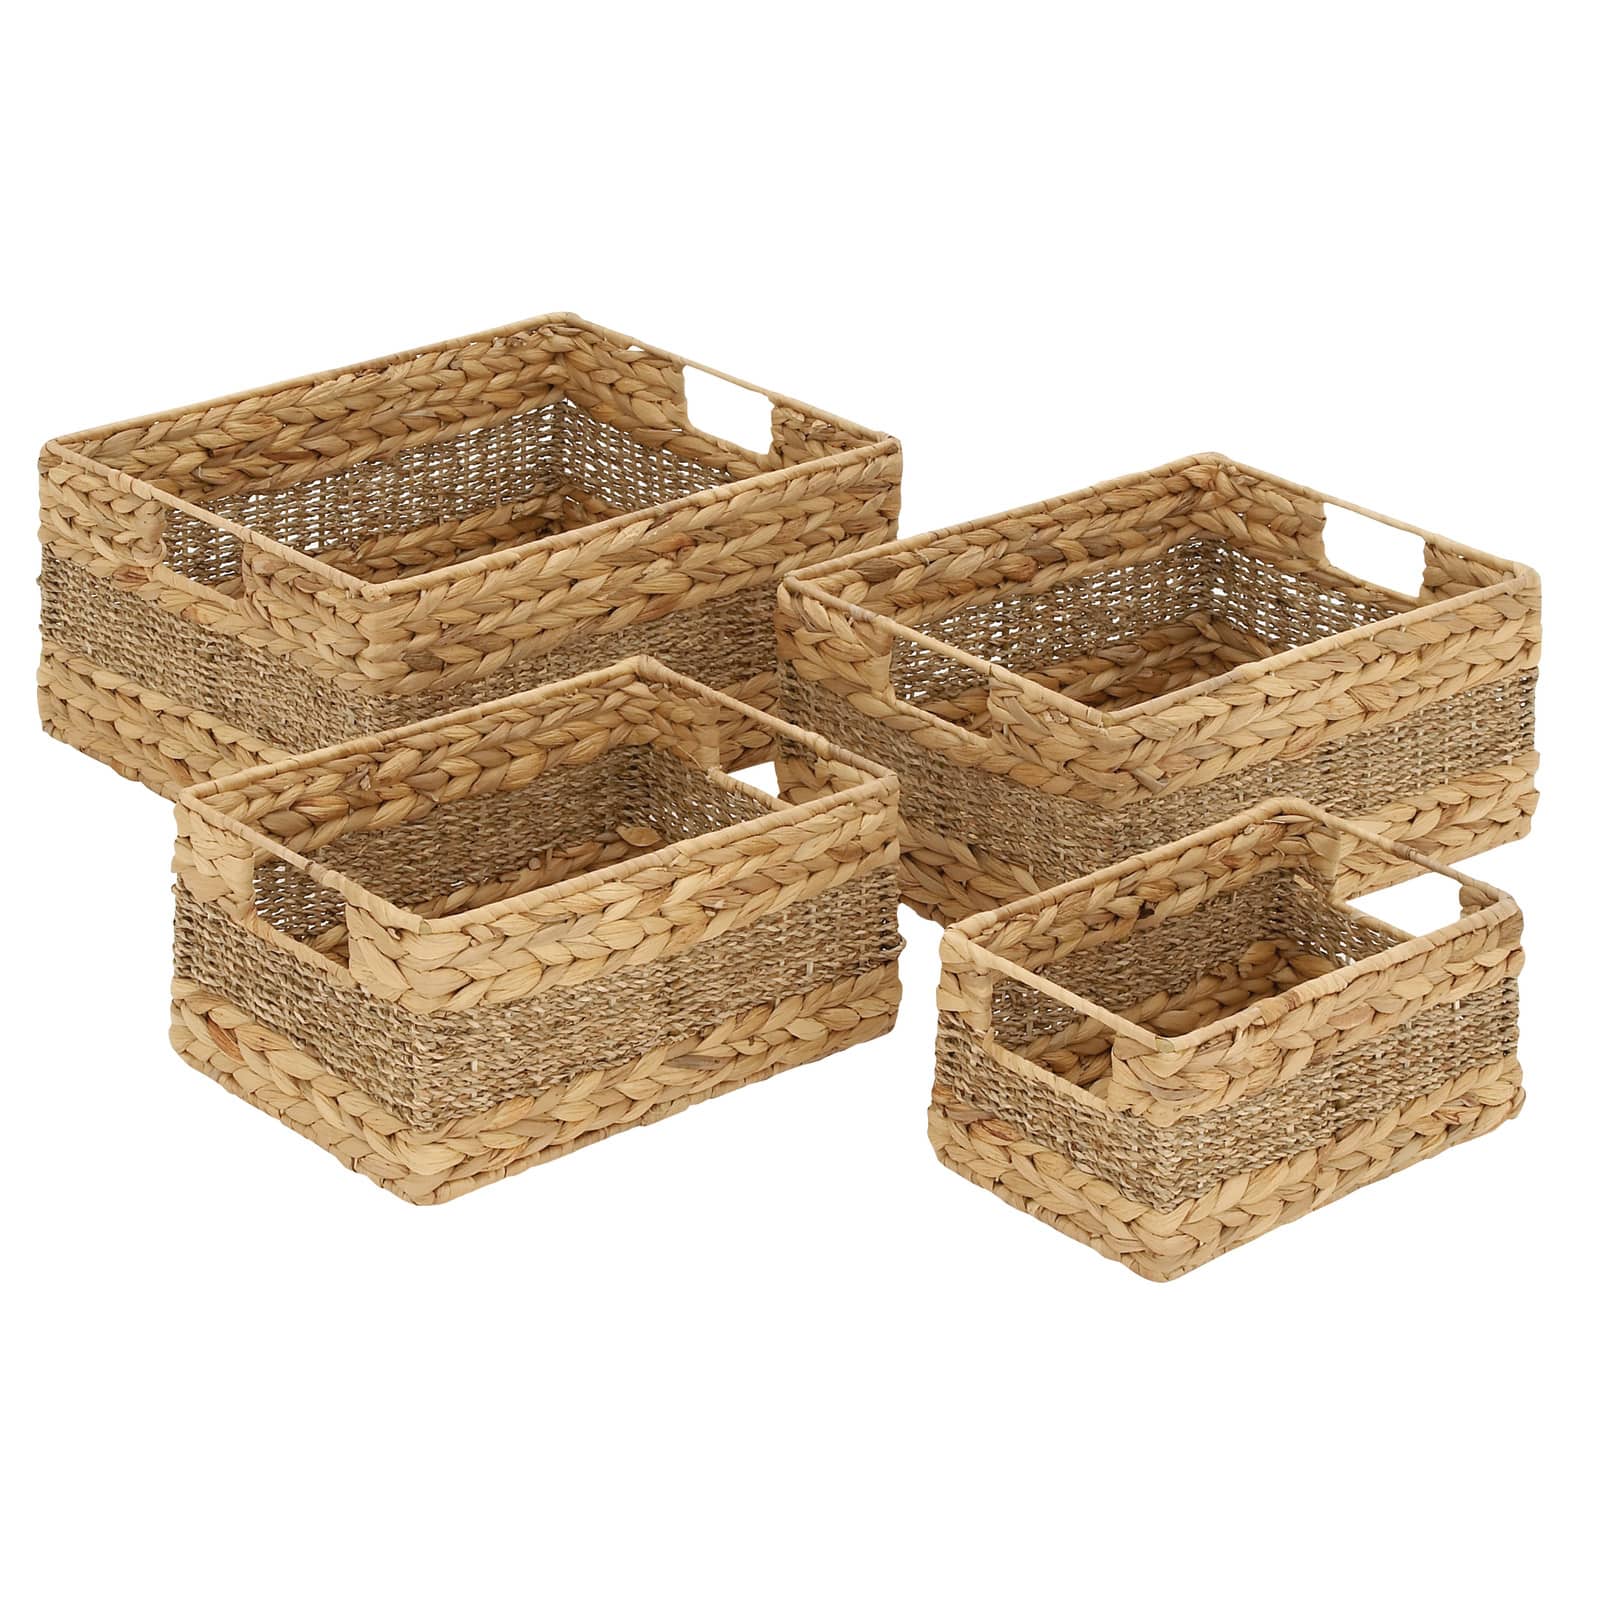 Natural Container 10 Days Shipping For US Handmade Seagrass Basket 